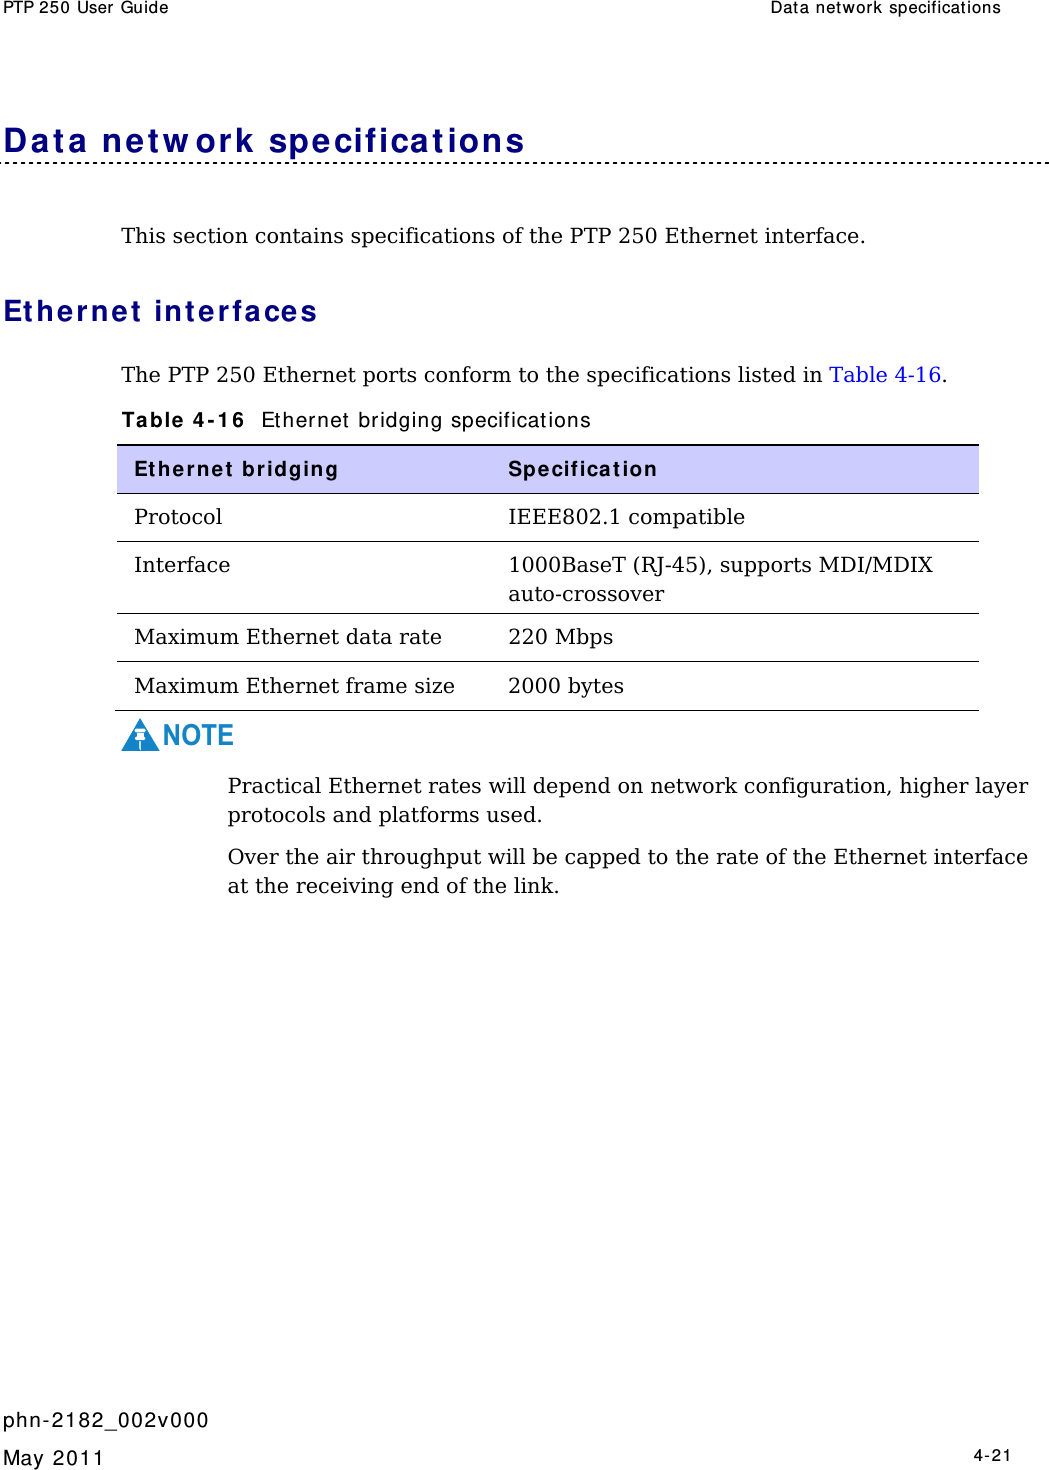 PTP 250 User Guide  Dat a network specifications   phn- 2182_002v000   May 2011   4-21  Da t a net w ork  specificat ions This section contains specifications of the PTP 250 Ethernet interface. Et herne t  int e r face s The PTP 250 Ethernet ports conform to the specifications listed in Table 4-16. Table  4 - 1 6   Ethernet  bridging specificat ions Et he rnet  bridging   Spe cifica t ion Protocol   IEEE802.1 compatible  Interface   1000BaseT (RJ-45), supports MDI/MDIX auto-crossover  Maximum Ethernet data rate  220 Mbps Maximum Ethernet frame size  2000 bytes NOTE Practical Ethernet rates will depend on network configuration, higher layer protocols and platforms used. Over the air throughput will be capped to the rate of the Ethernet interface at the receiving end of the link.  